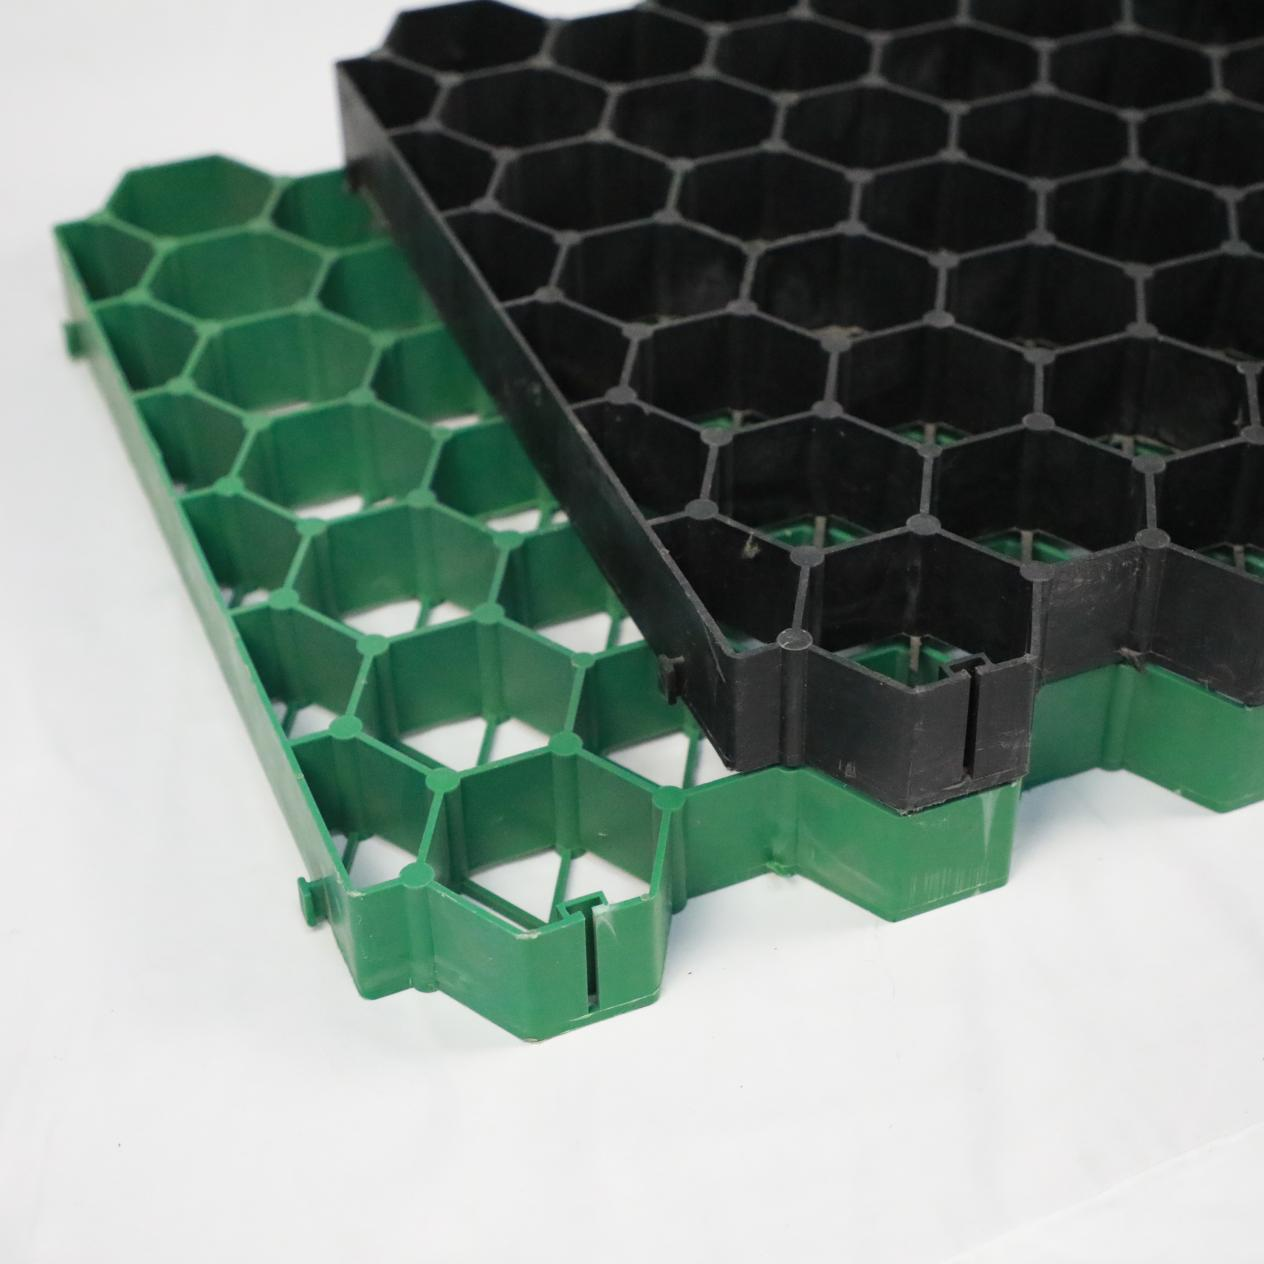 China Factory Plastic Hdpe Black Green Grass Grid for Parking Lot / Road/driveway for Sale